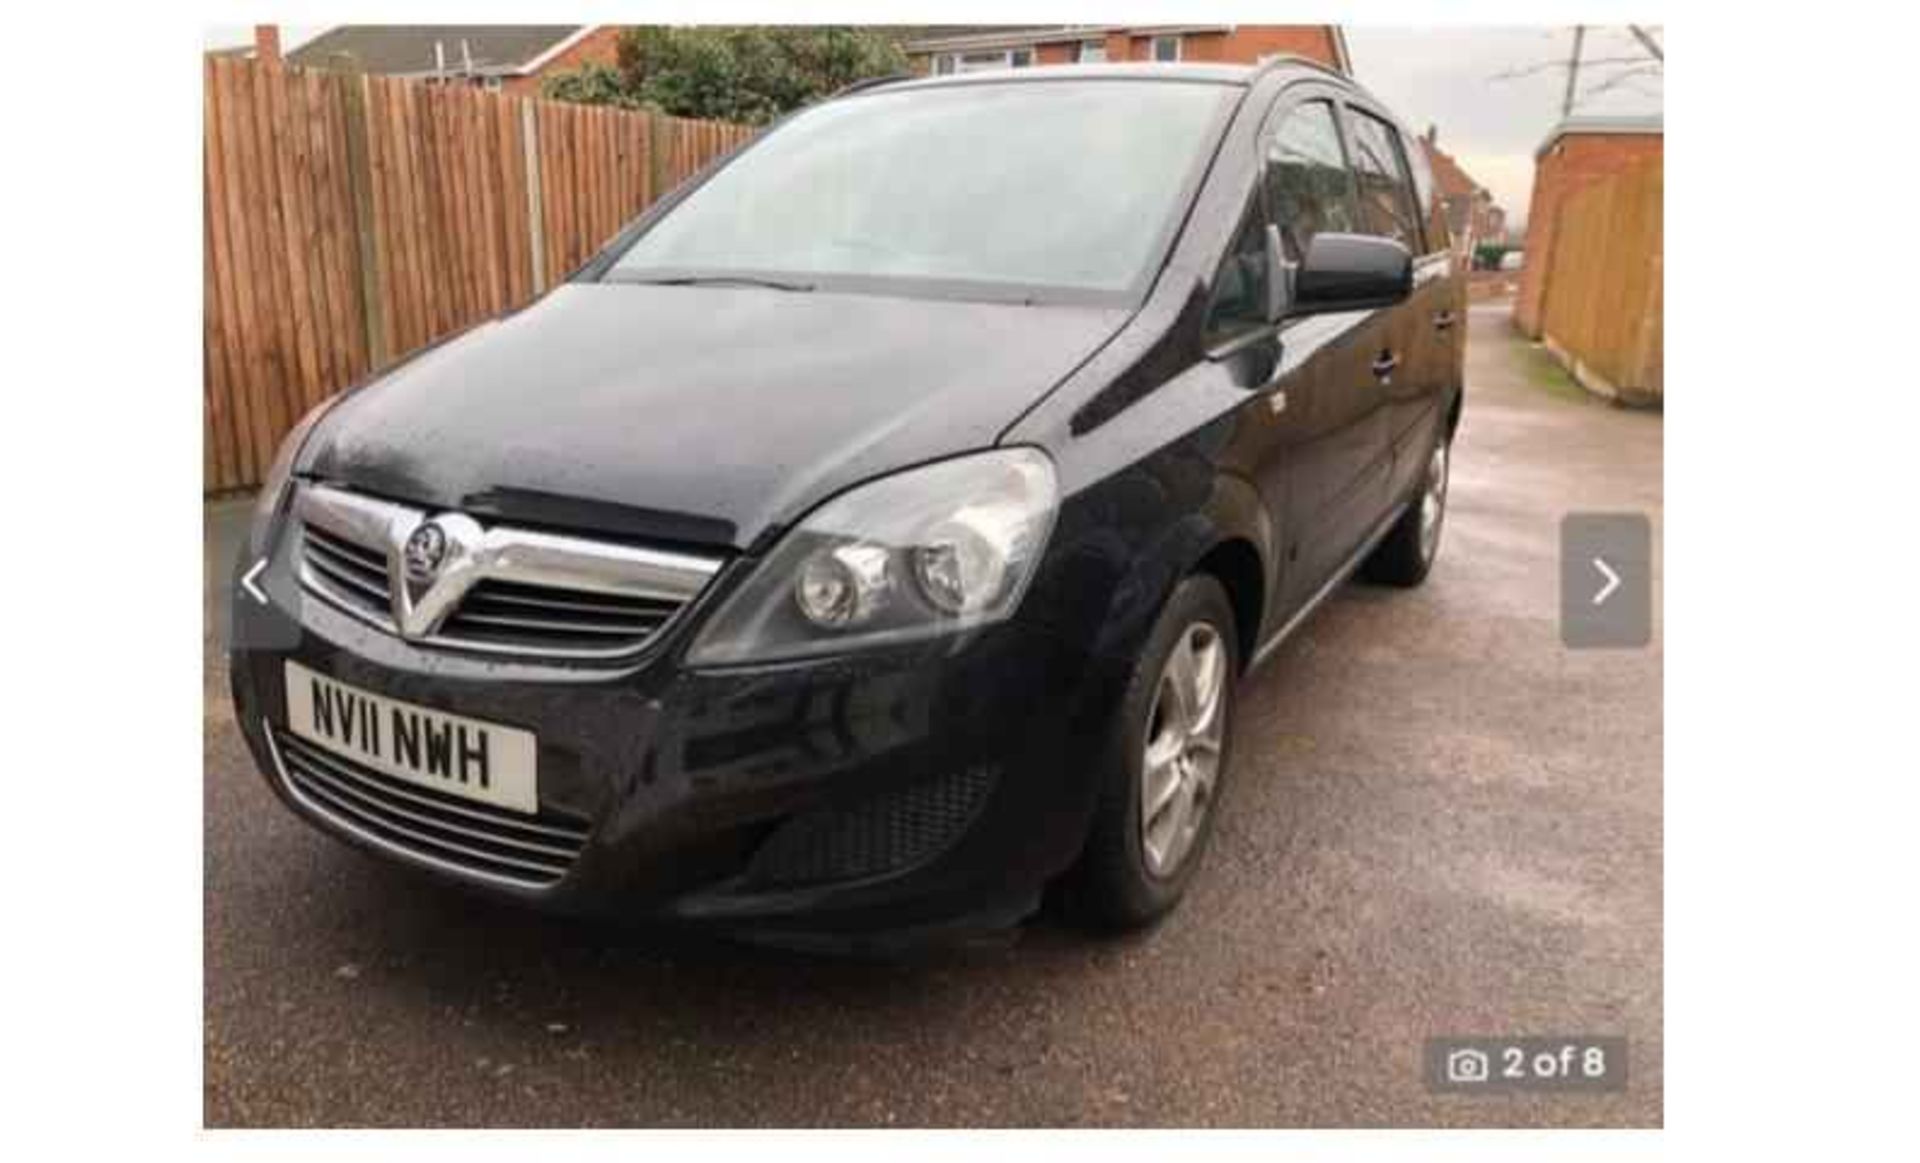 Vauxhall Zafira 1.8i Exclusive Easytronic Automatic Gearbox Wheelchair / Disability Vehicle2011